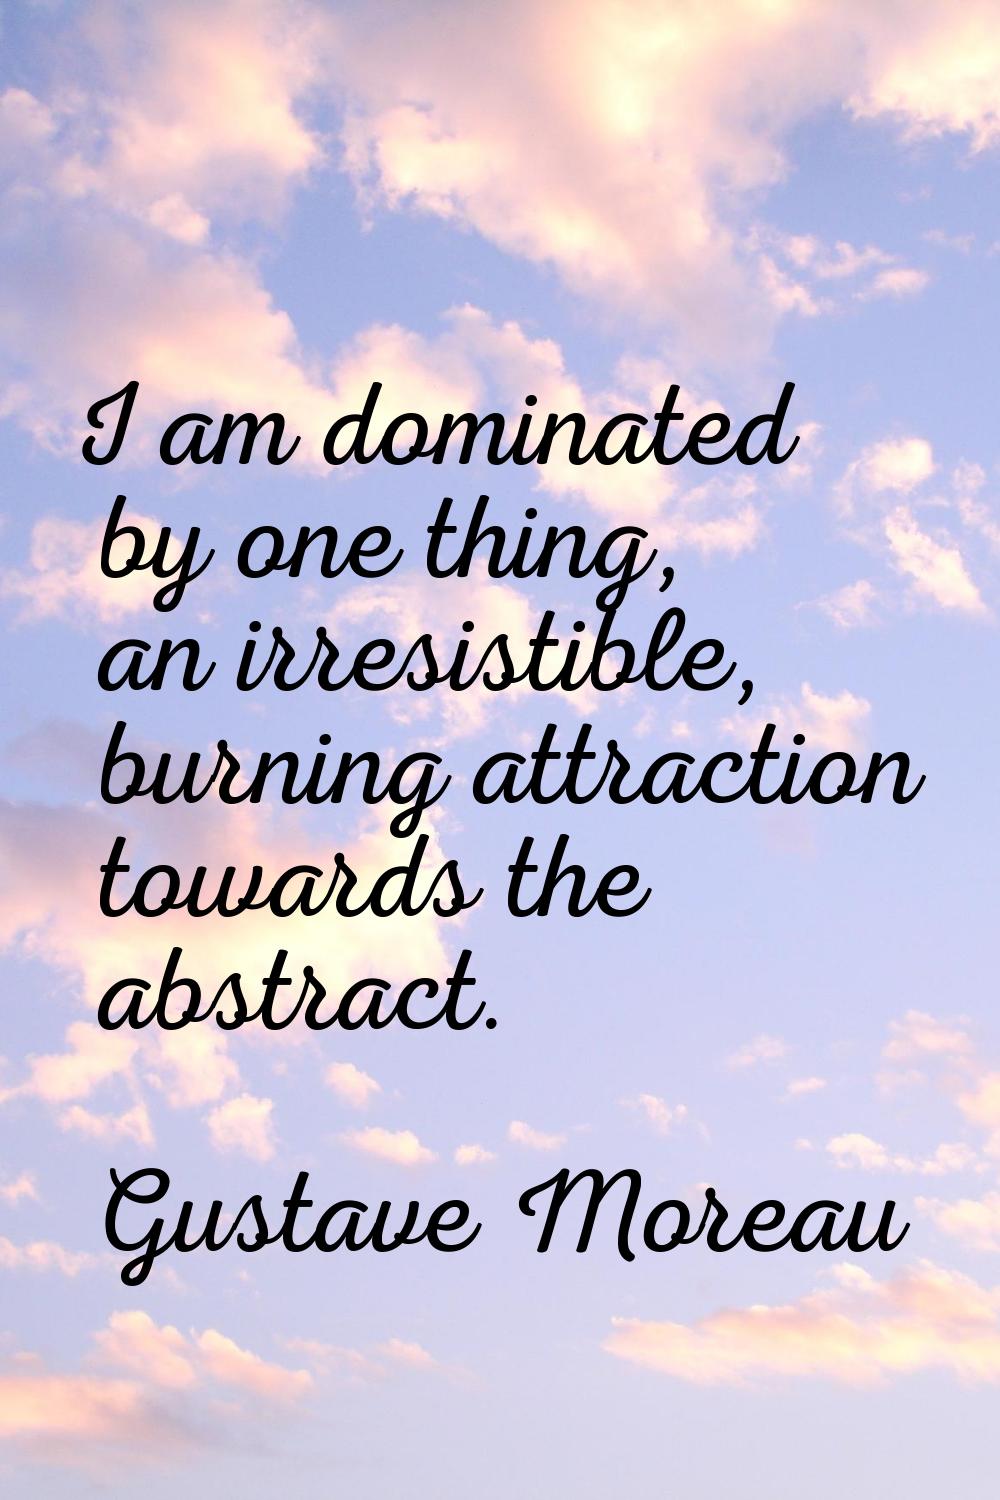 I am dominated by one thing, an irresistible, burning attraction towards the abstract.